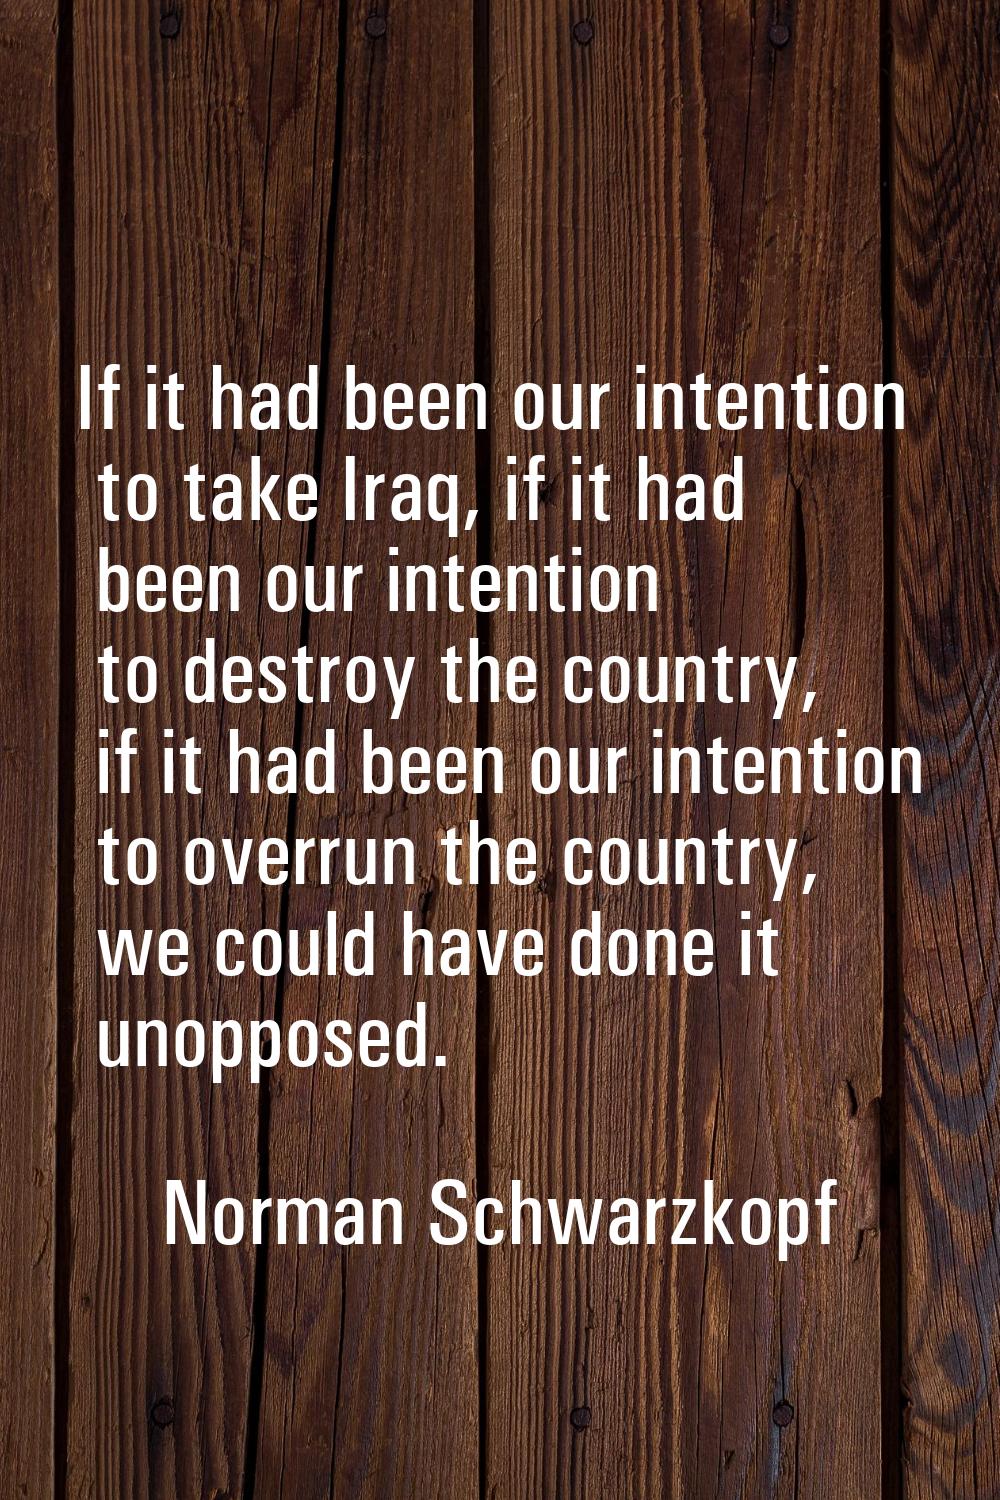 If it had been our intention to take Iraq, if it had been our intention to destroy the country, if 